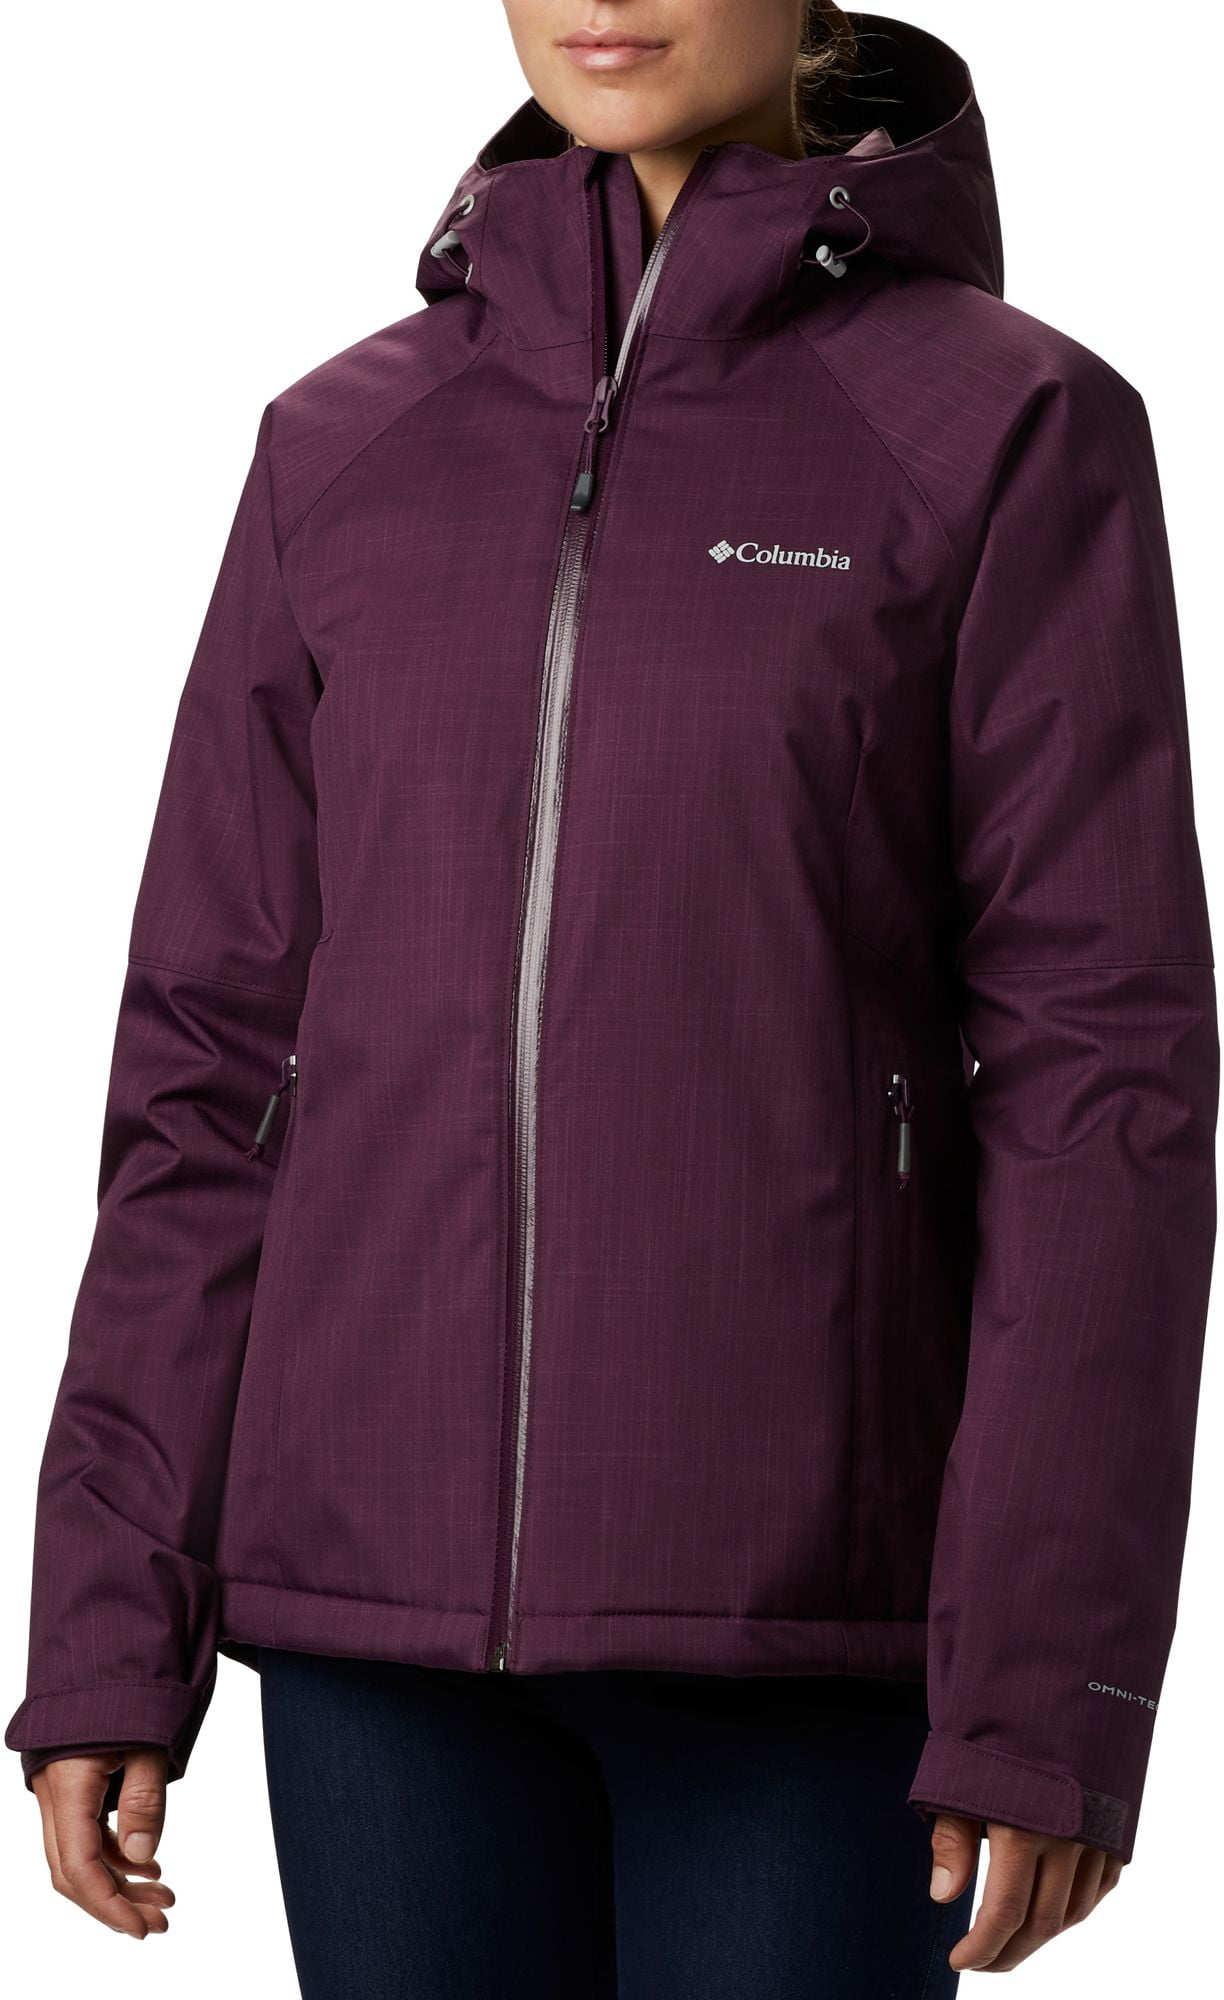 columbia top pine insulated jacket